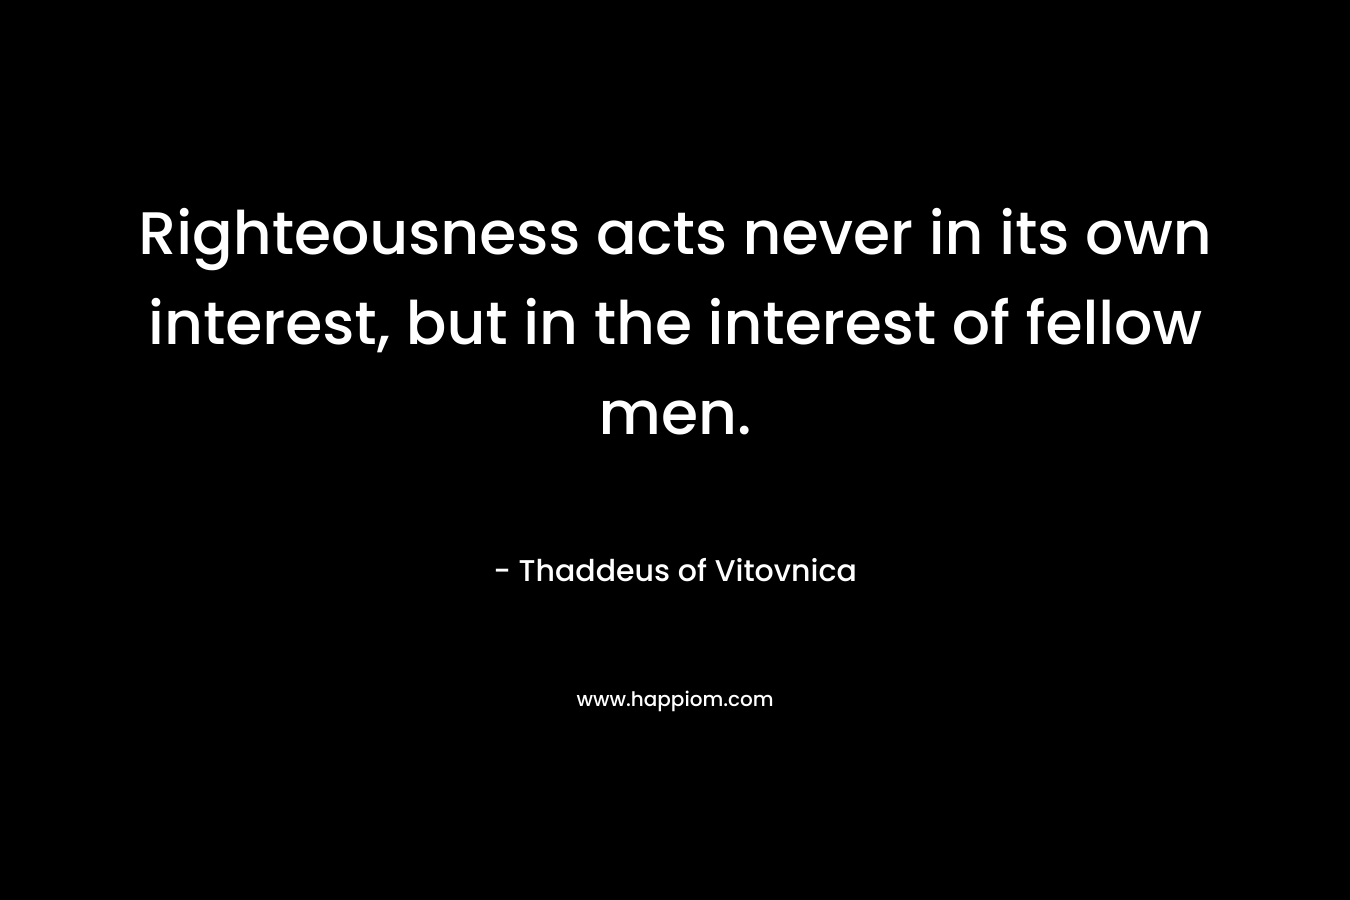 Righteousness acts never in its own interest, but in the interest of fellow men.